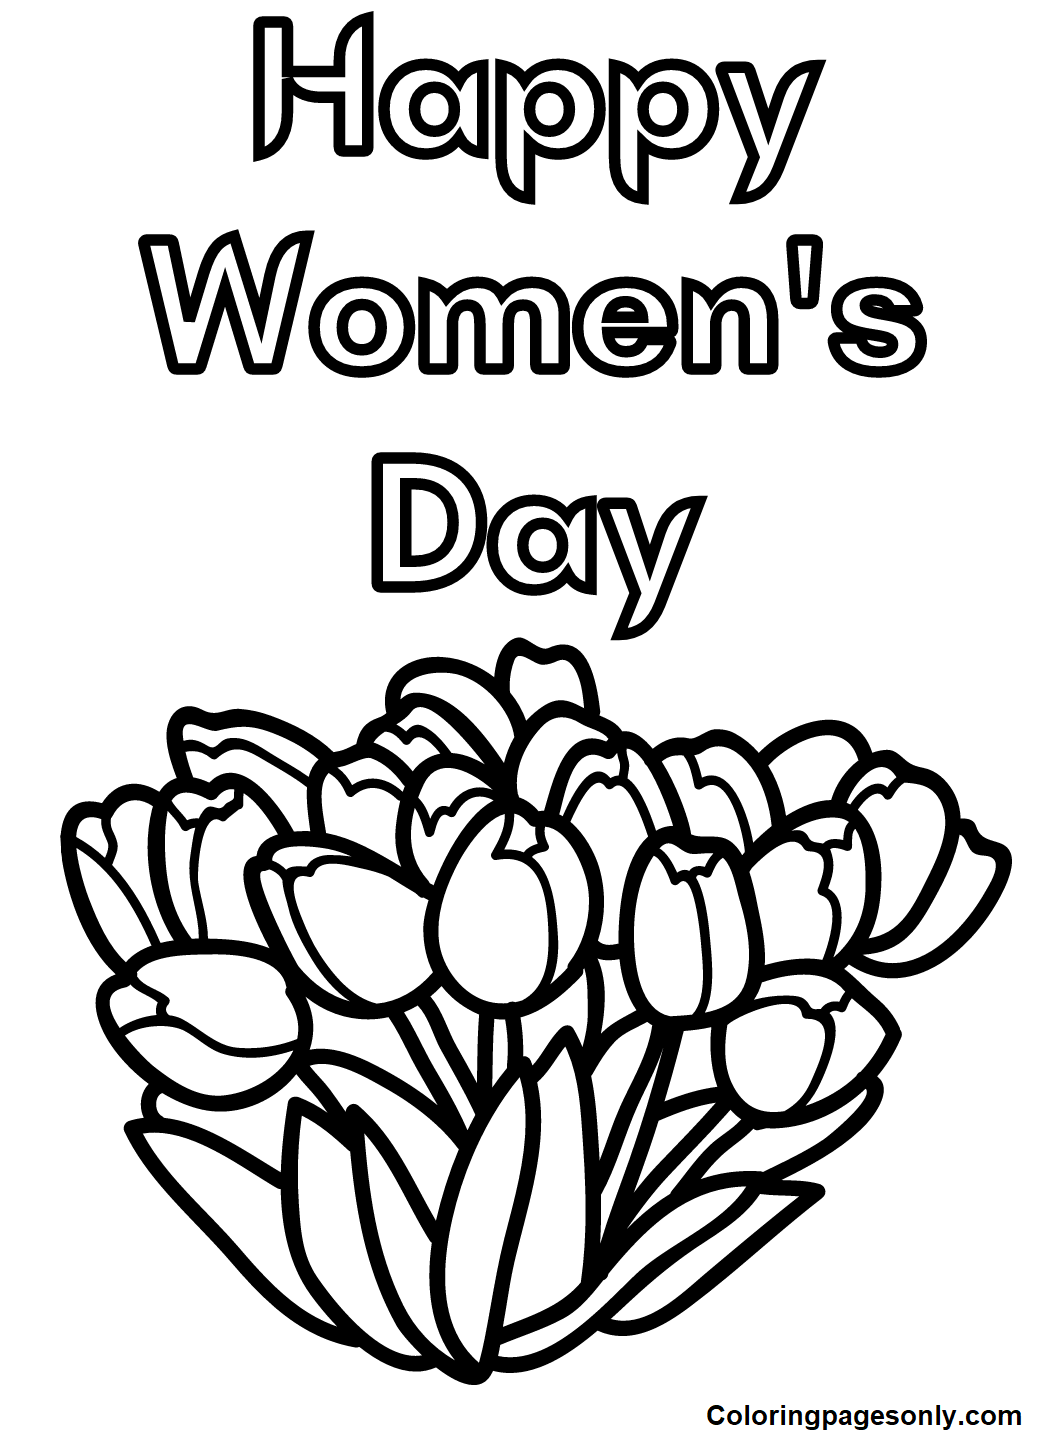 Happy Women’s Day Picture To Print Coloring Pages